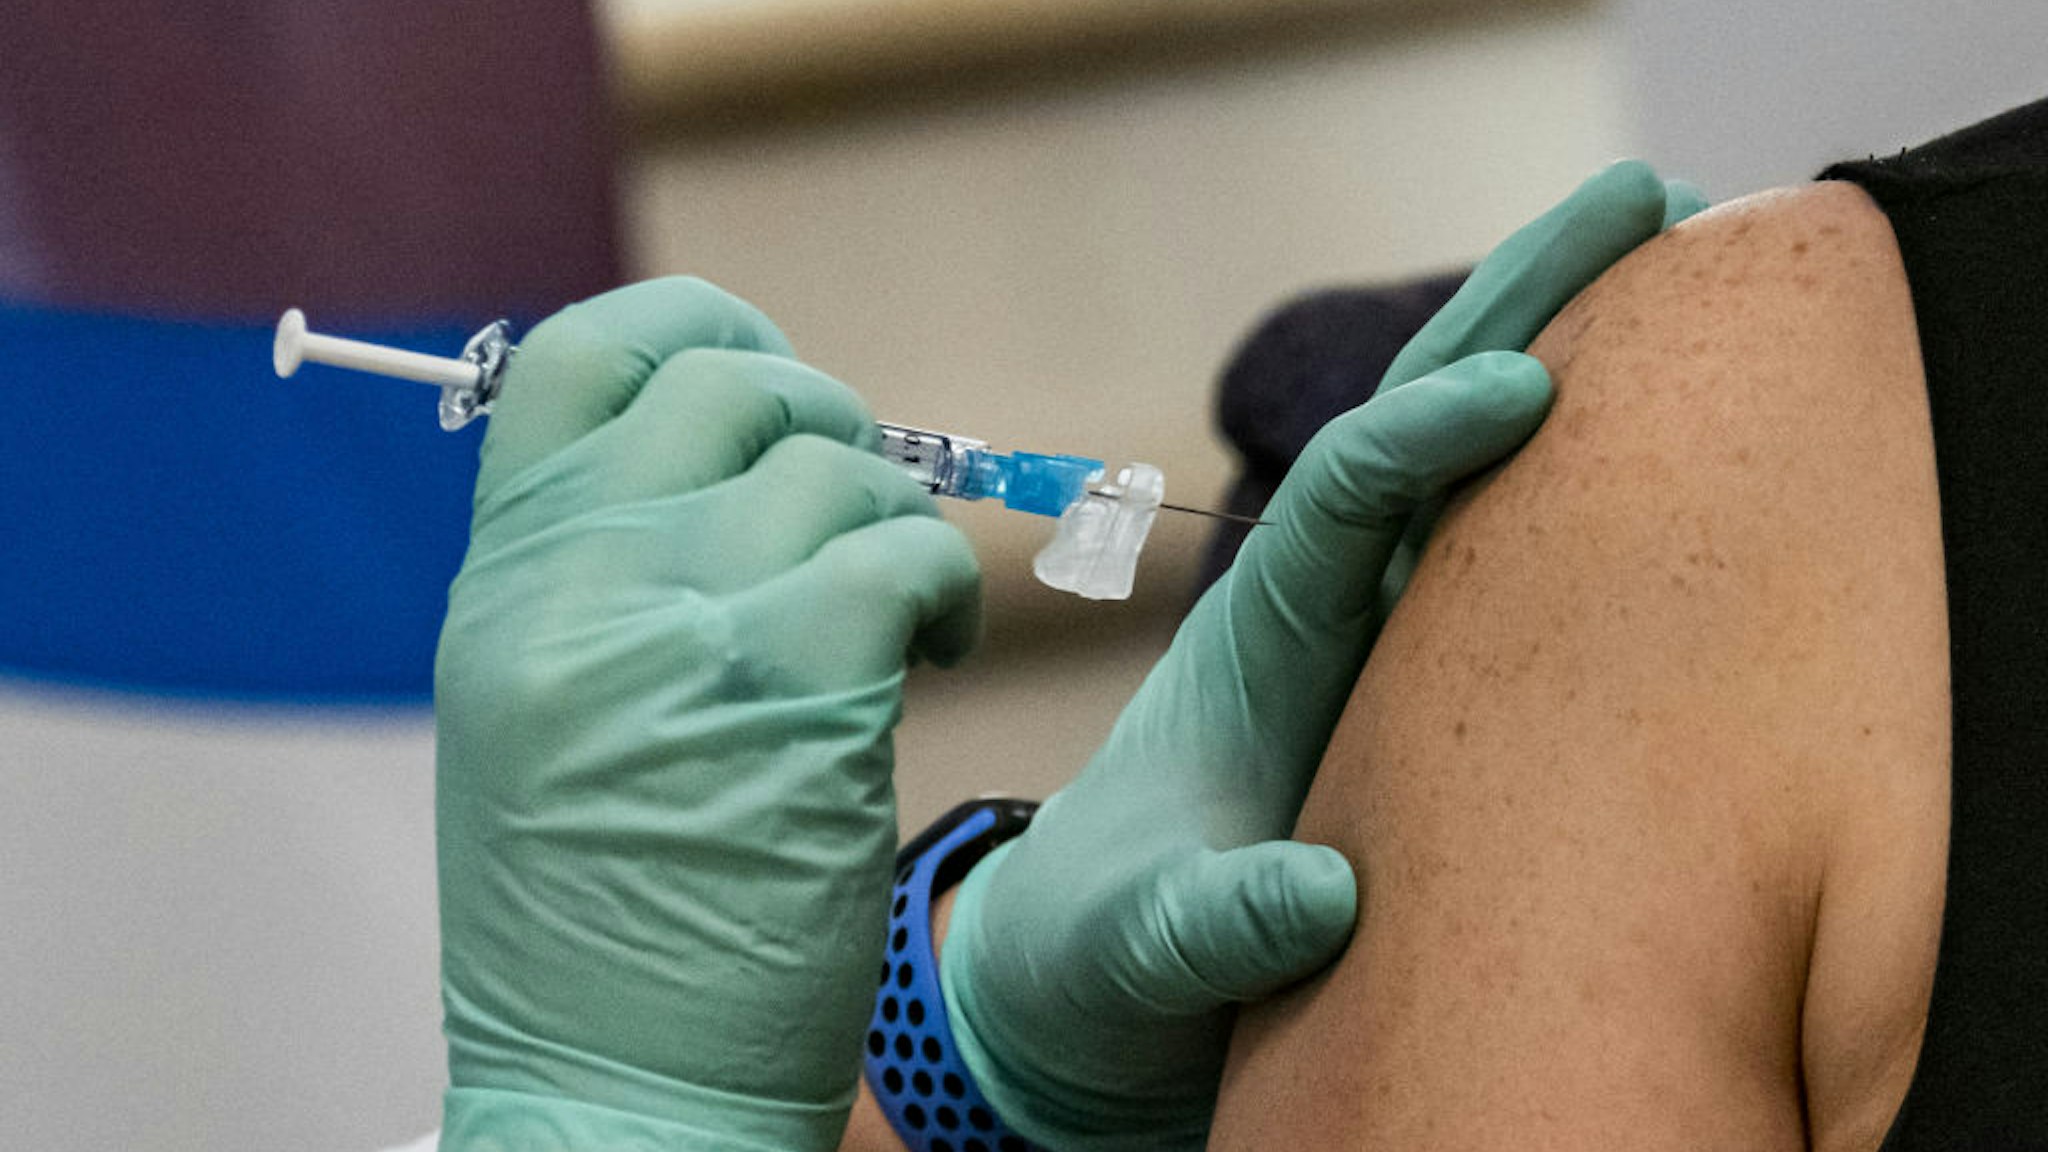 A healthcare worker receives the Pfizer-BioNTech Covid-19 vaccine at Regional Medical Center in San Jose, California, U.S., on Friday, Dec. 18, 2020. Vaccinations in the U.S. began this week with health-care workers, and 24 states reported the first 49,567 doses administered.